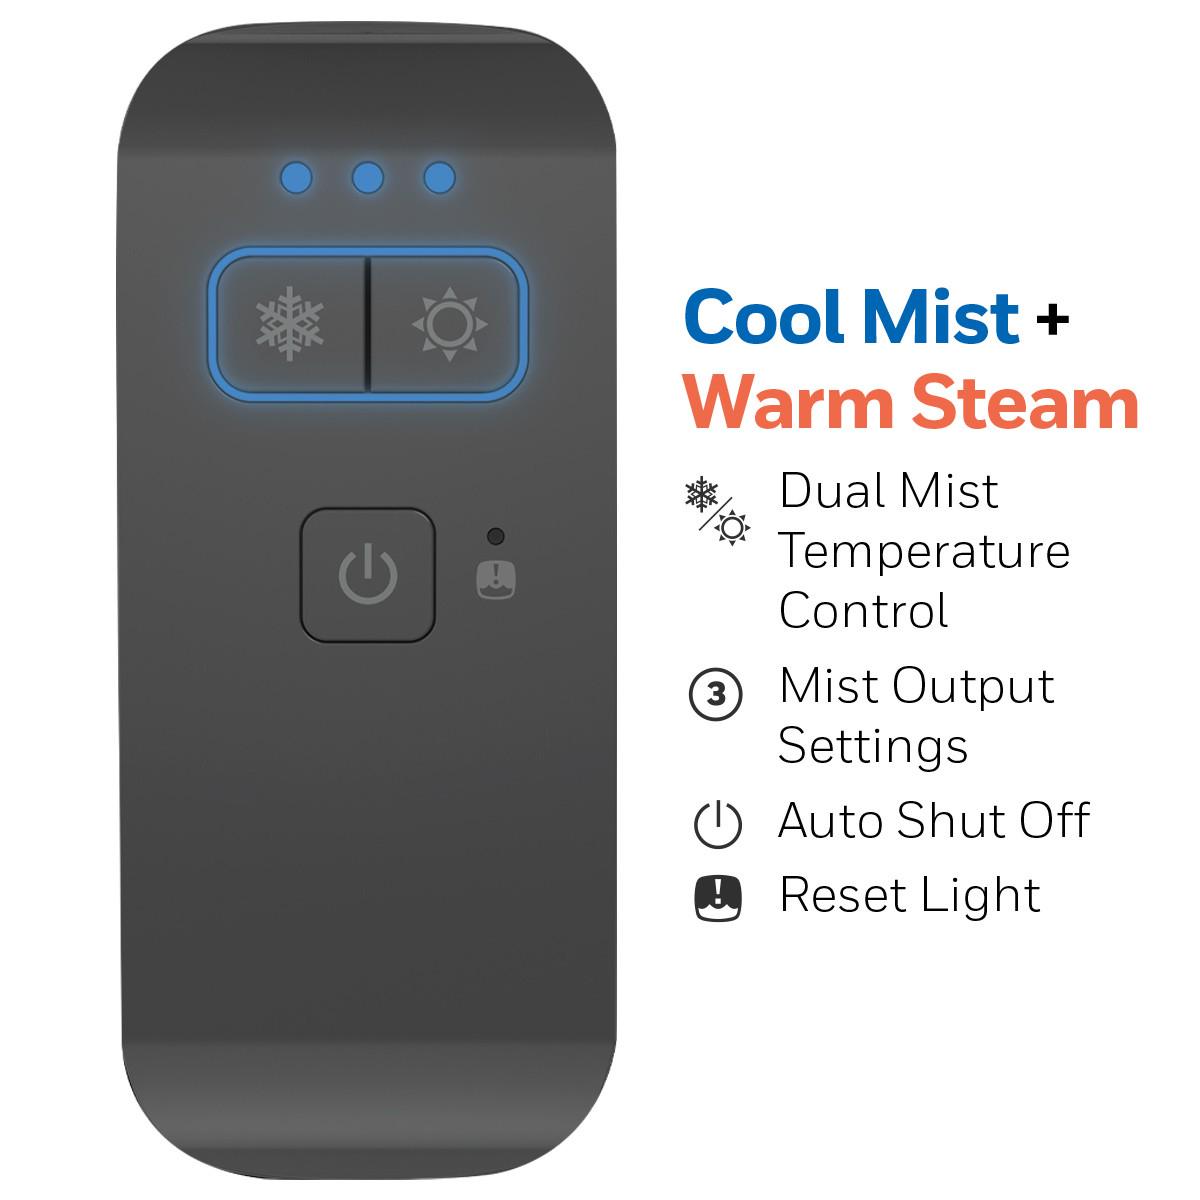 Honeywell Dual Comfort Cool + Warm Mist Humidifier with Fusion Mist Technology for Large Rooms HWC775B Black  Crowdfused